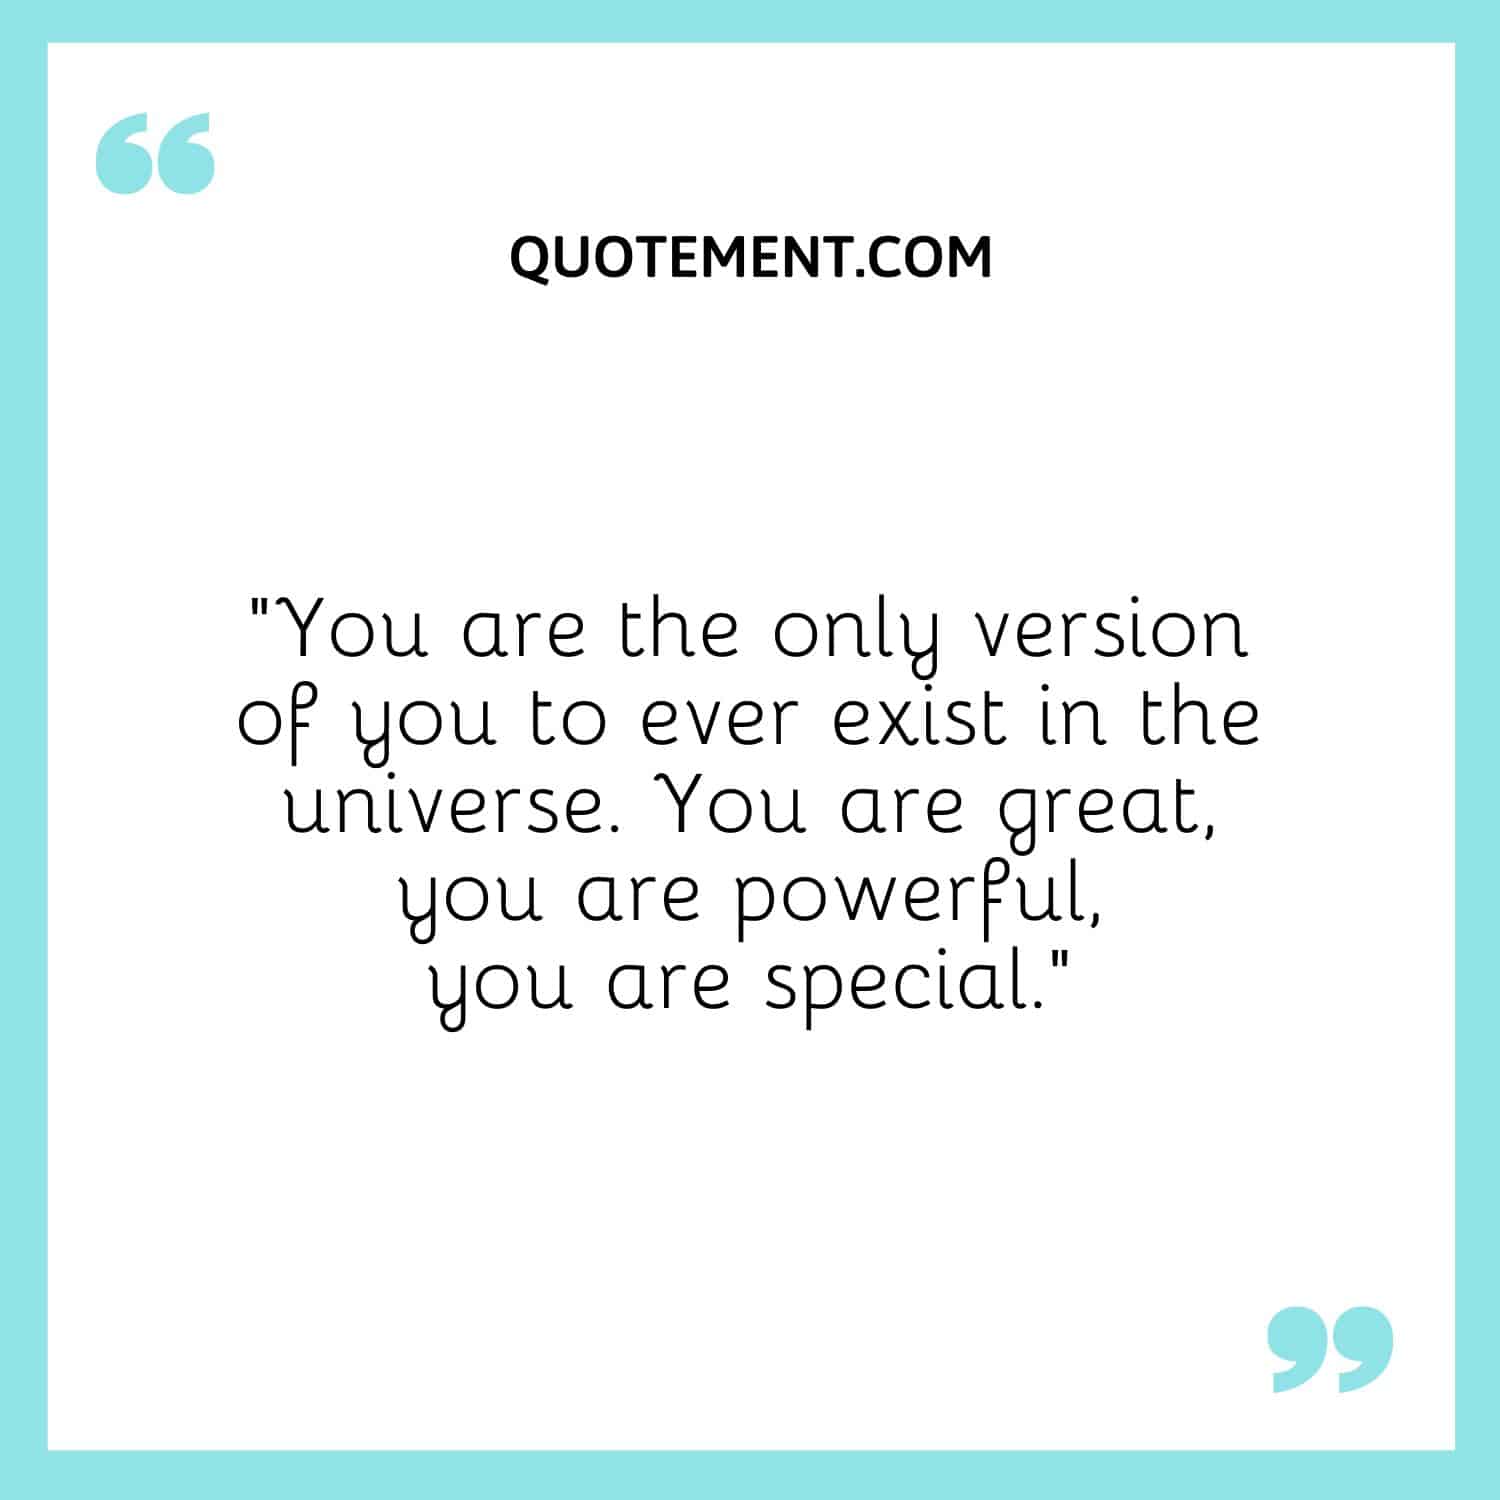 You are the only version of you to ever exist in the universe